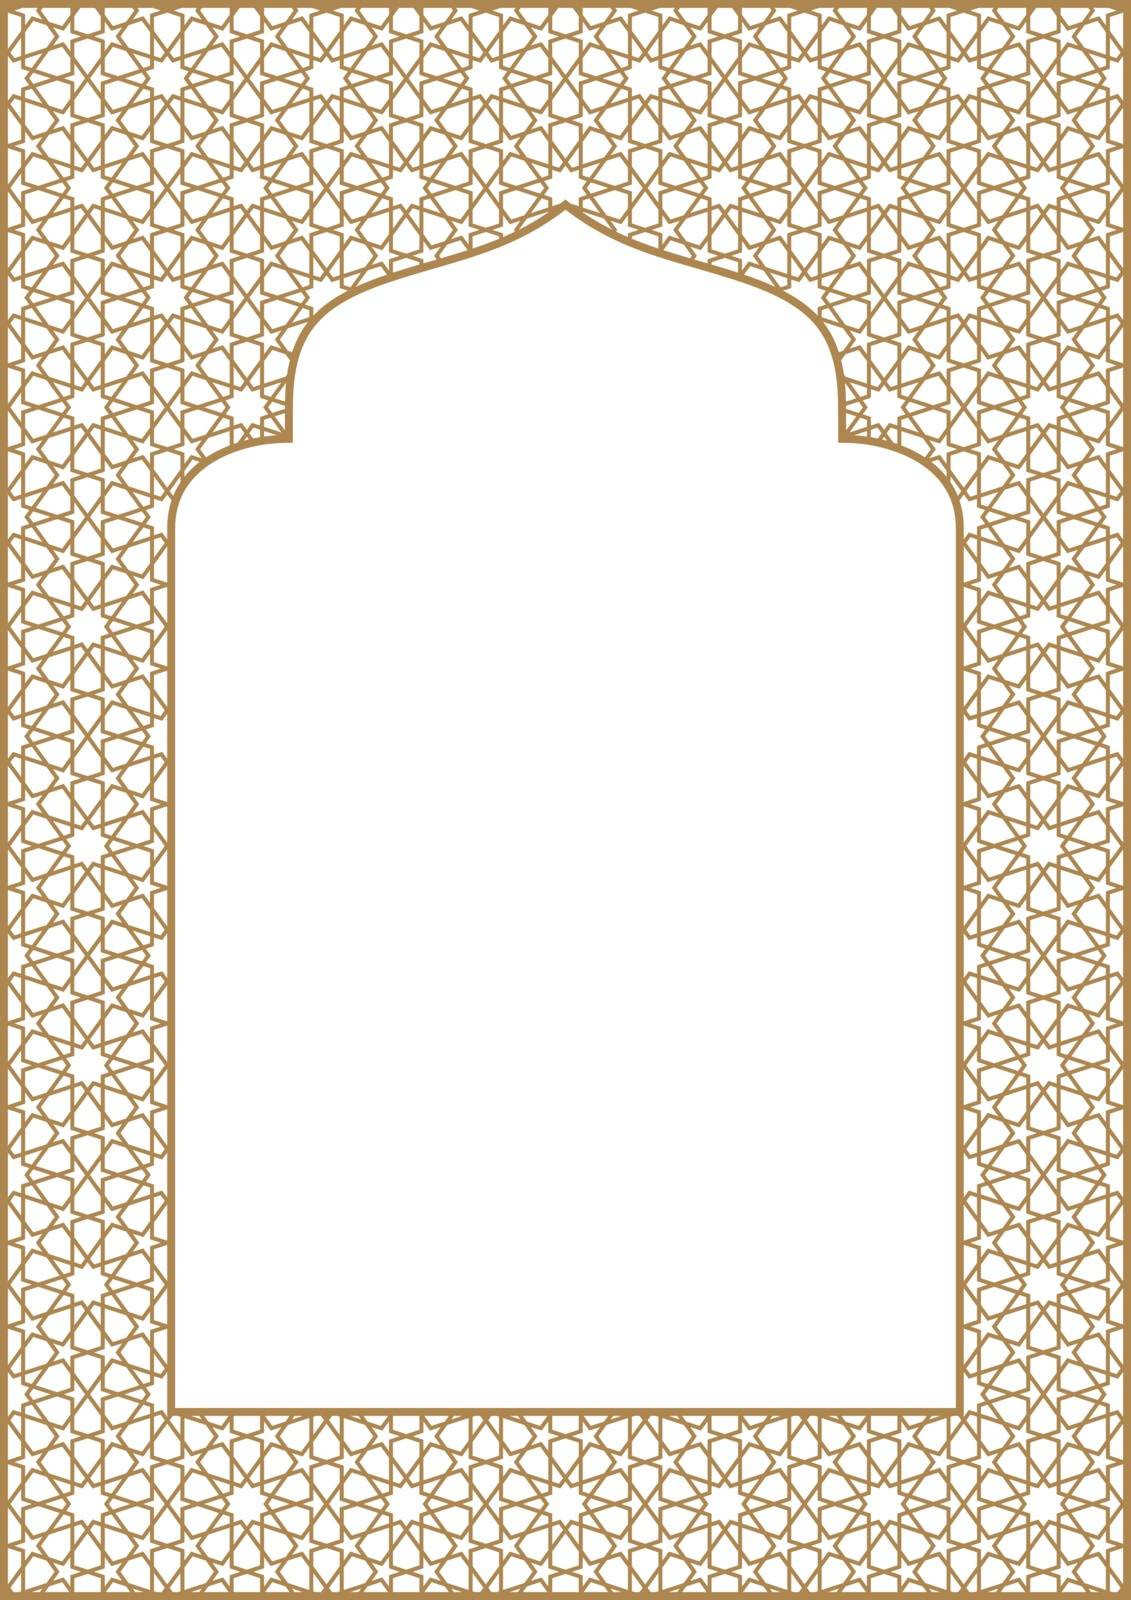 Rectangular frame of the Arabic pattern with proportion A4.